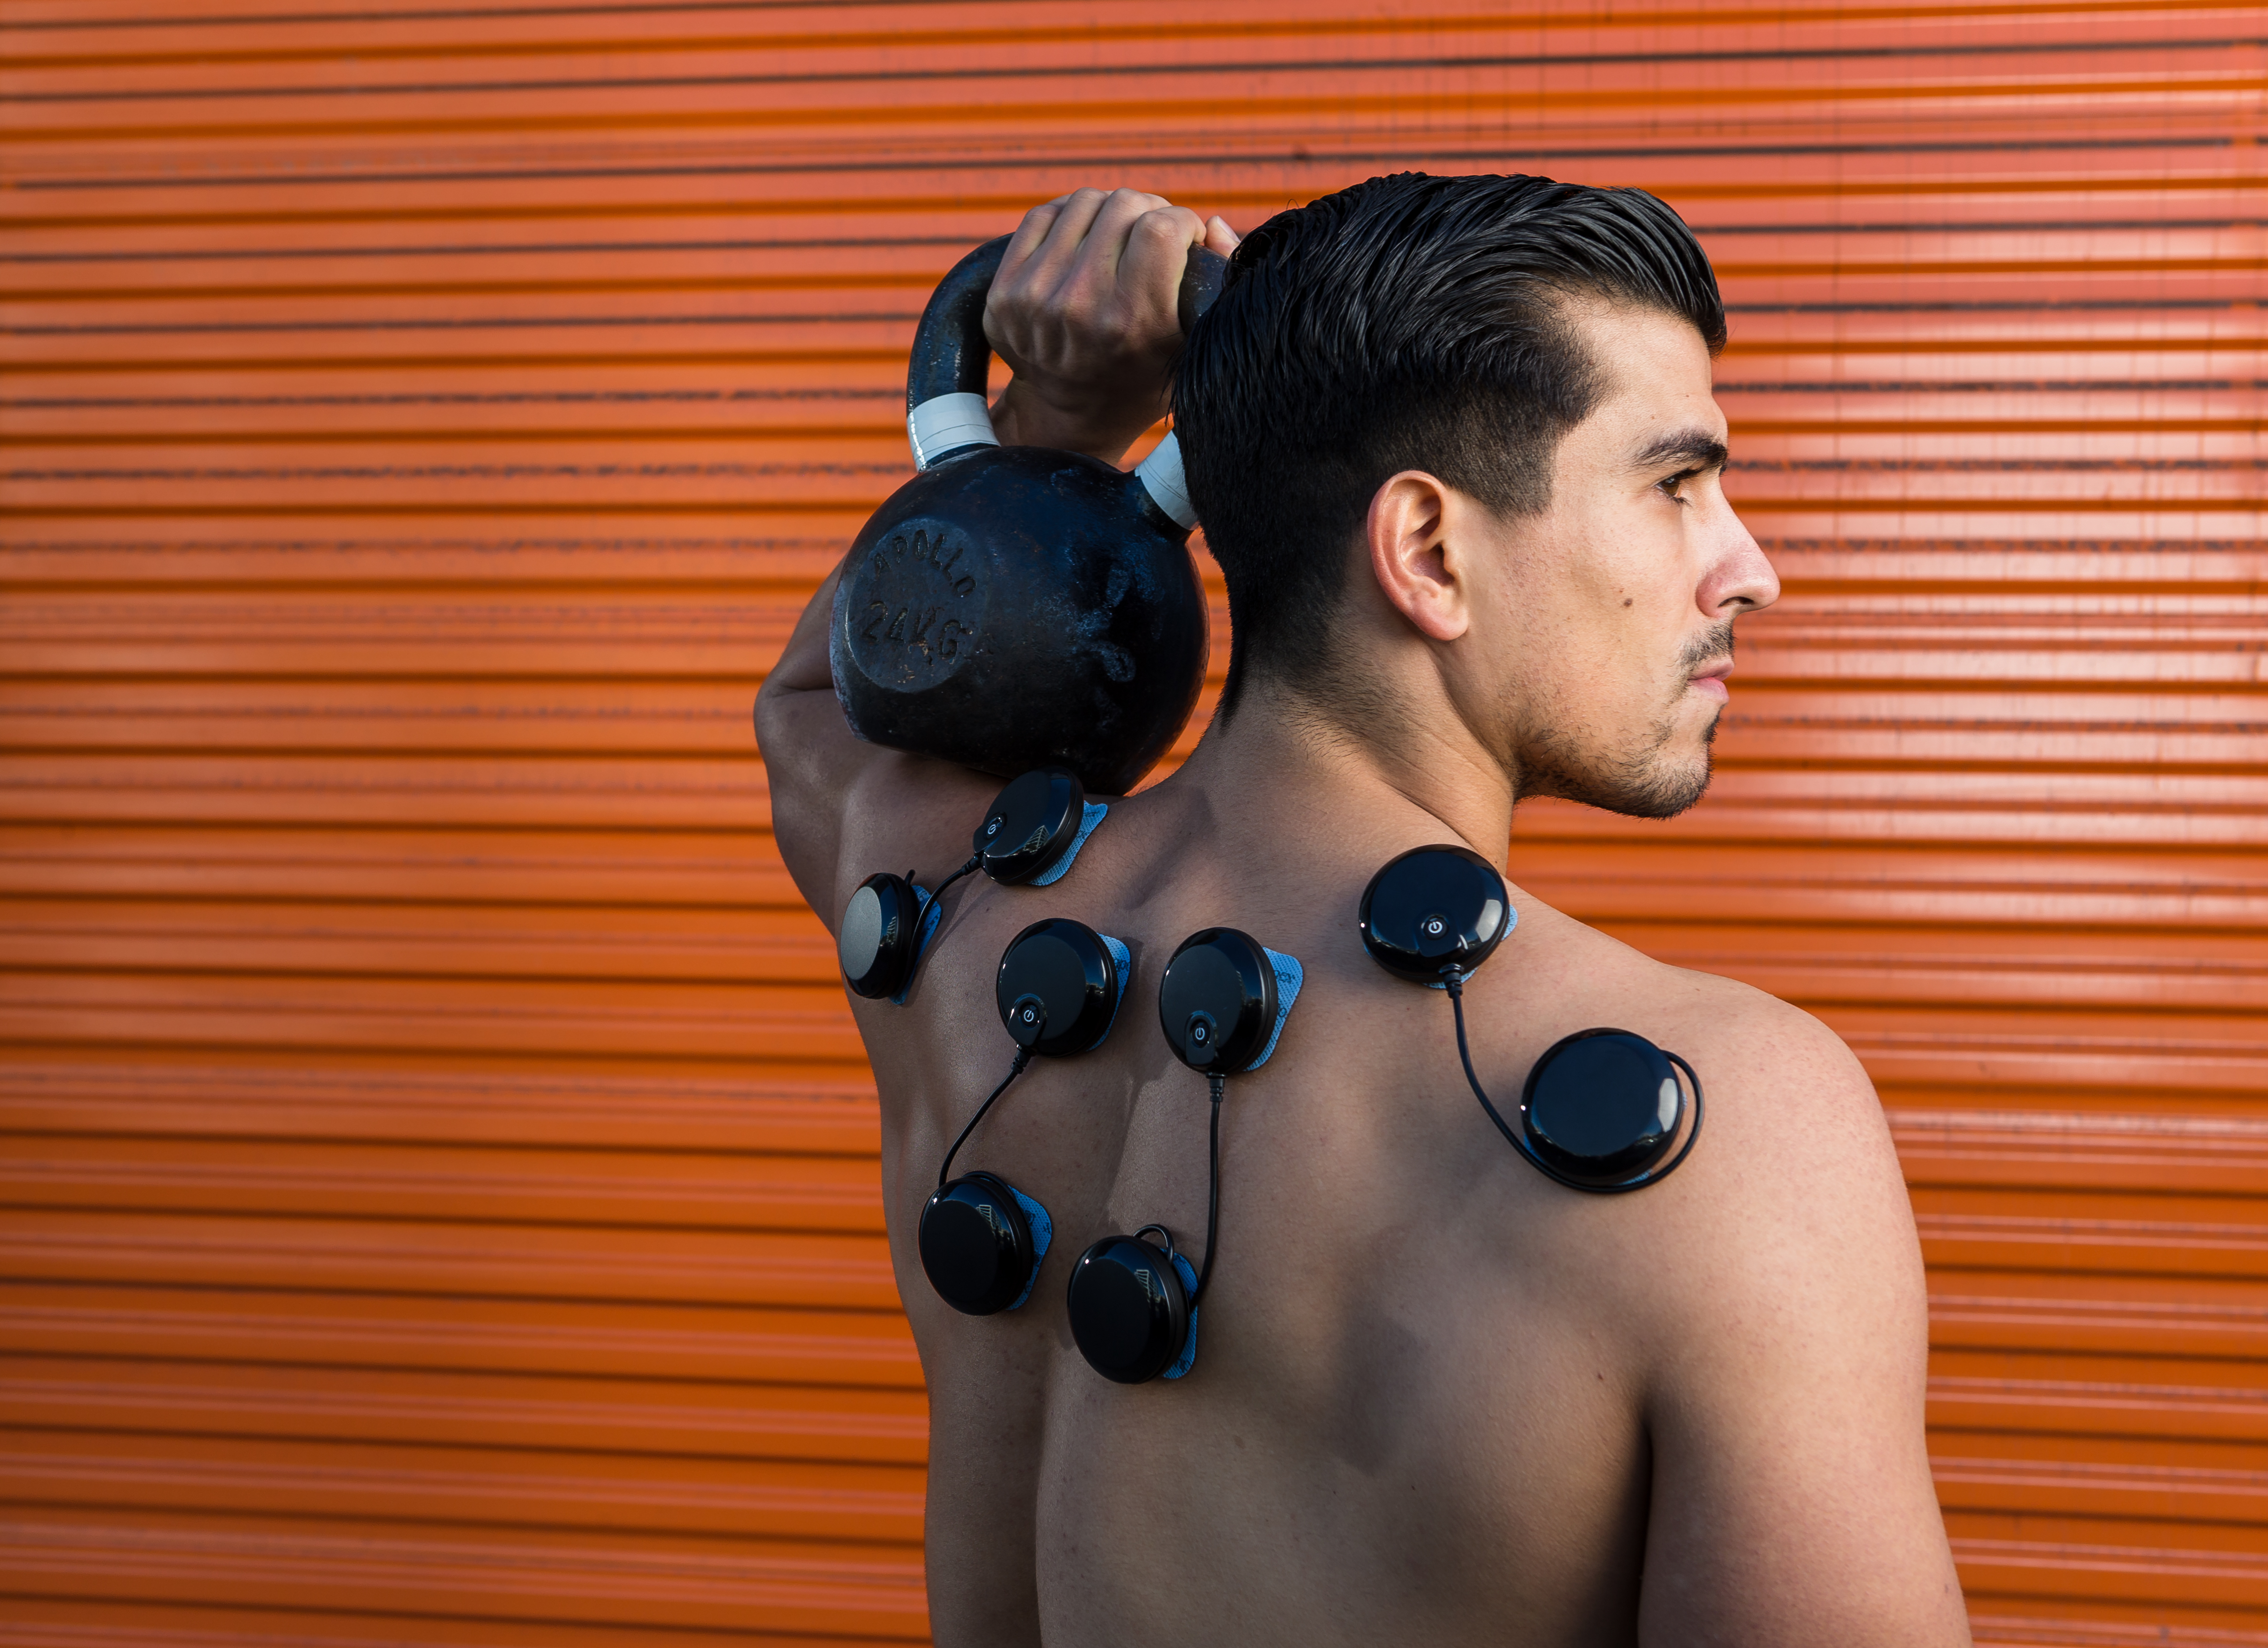 Product Review: Compex Electrical Muscle Stimulators (EMS) Devices